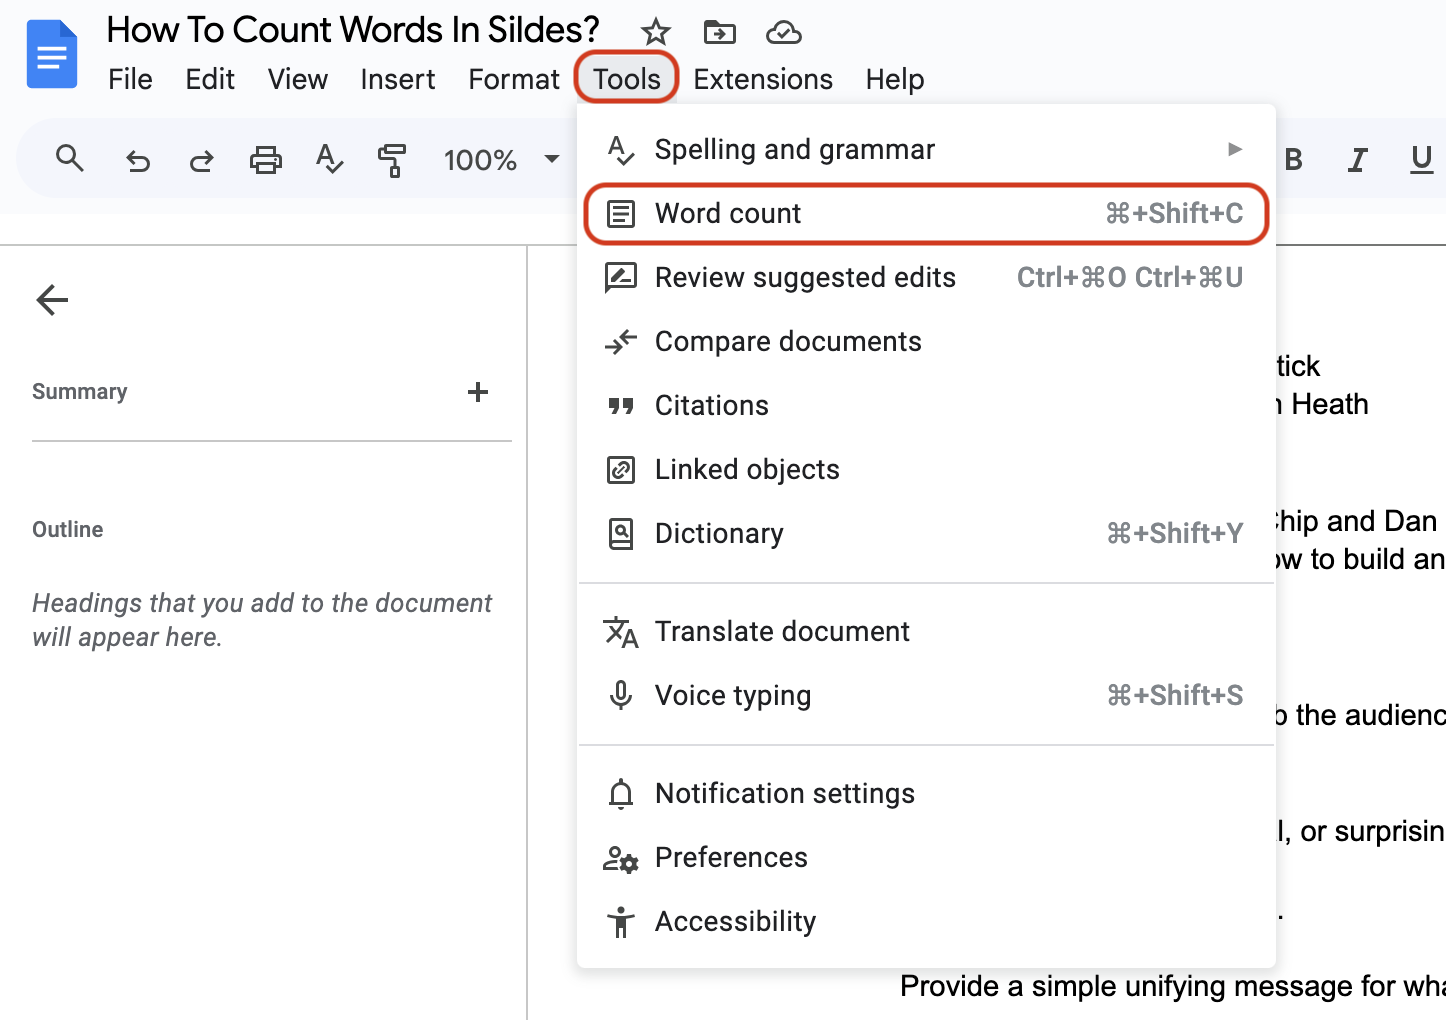 Go to Tools and Select Word Count